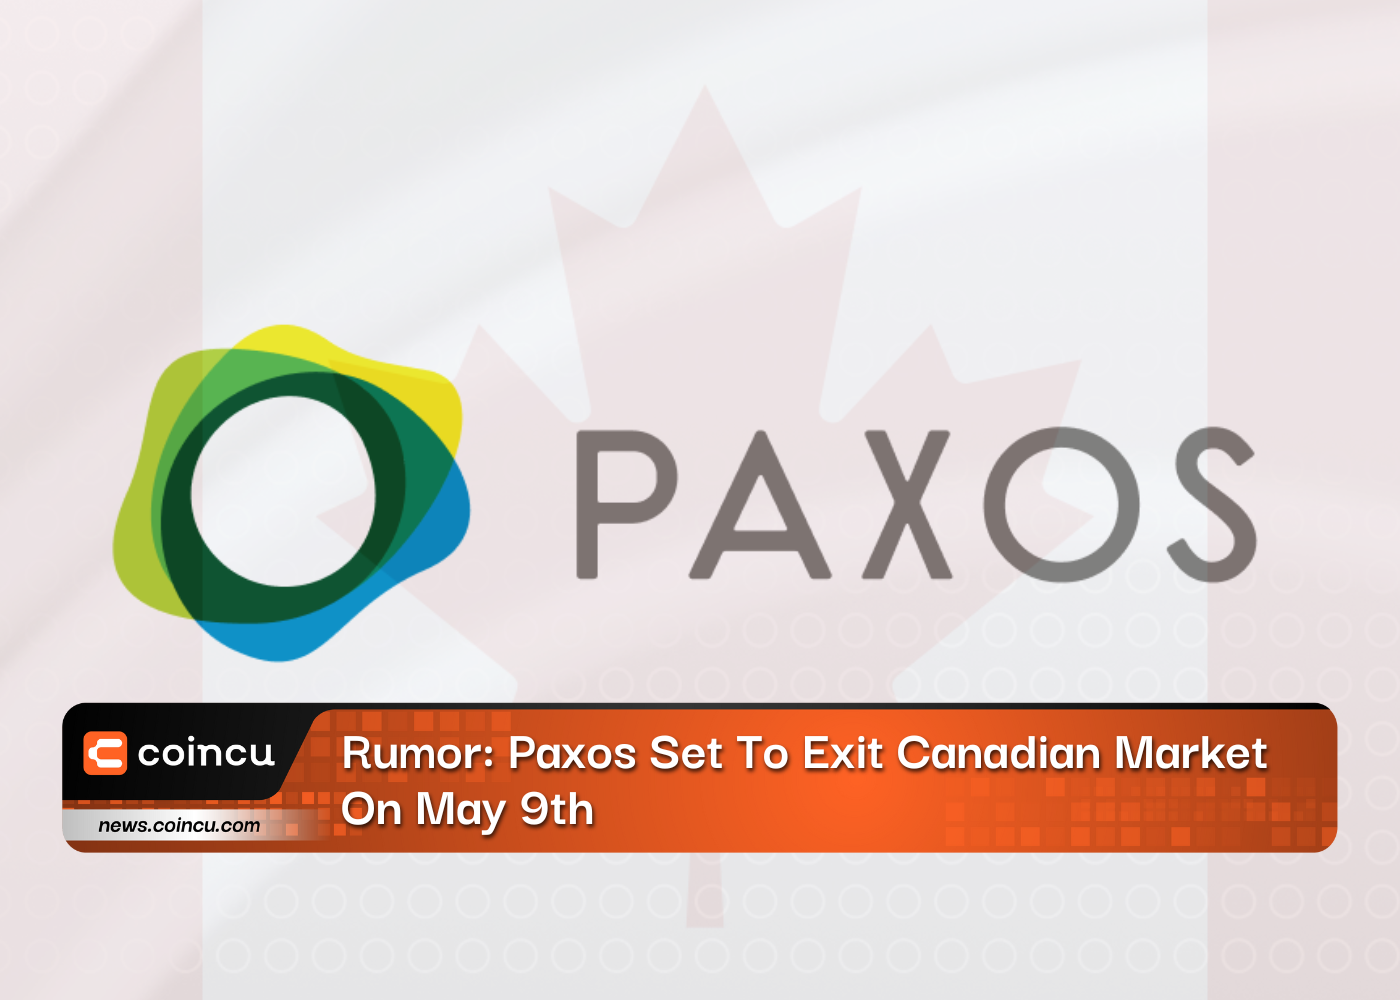 Rumor: Paxos Set To Exit Canadian Market On May 9th